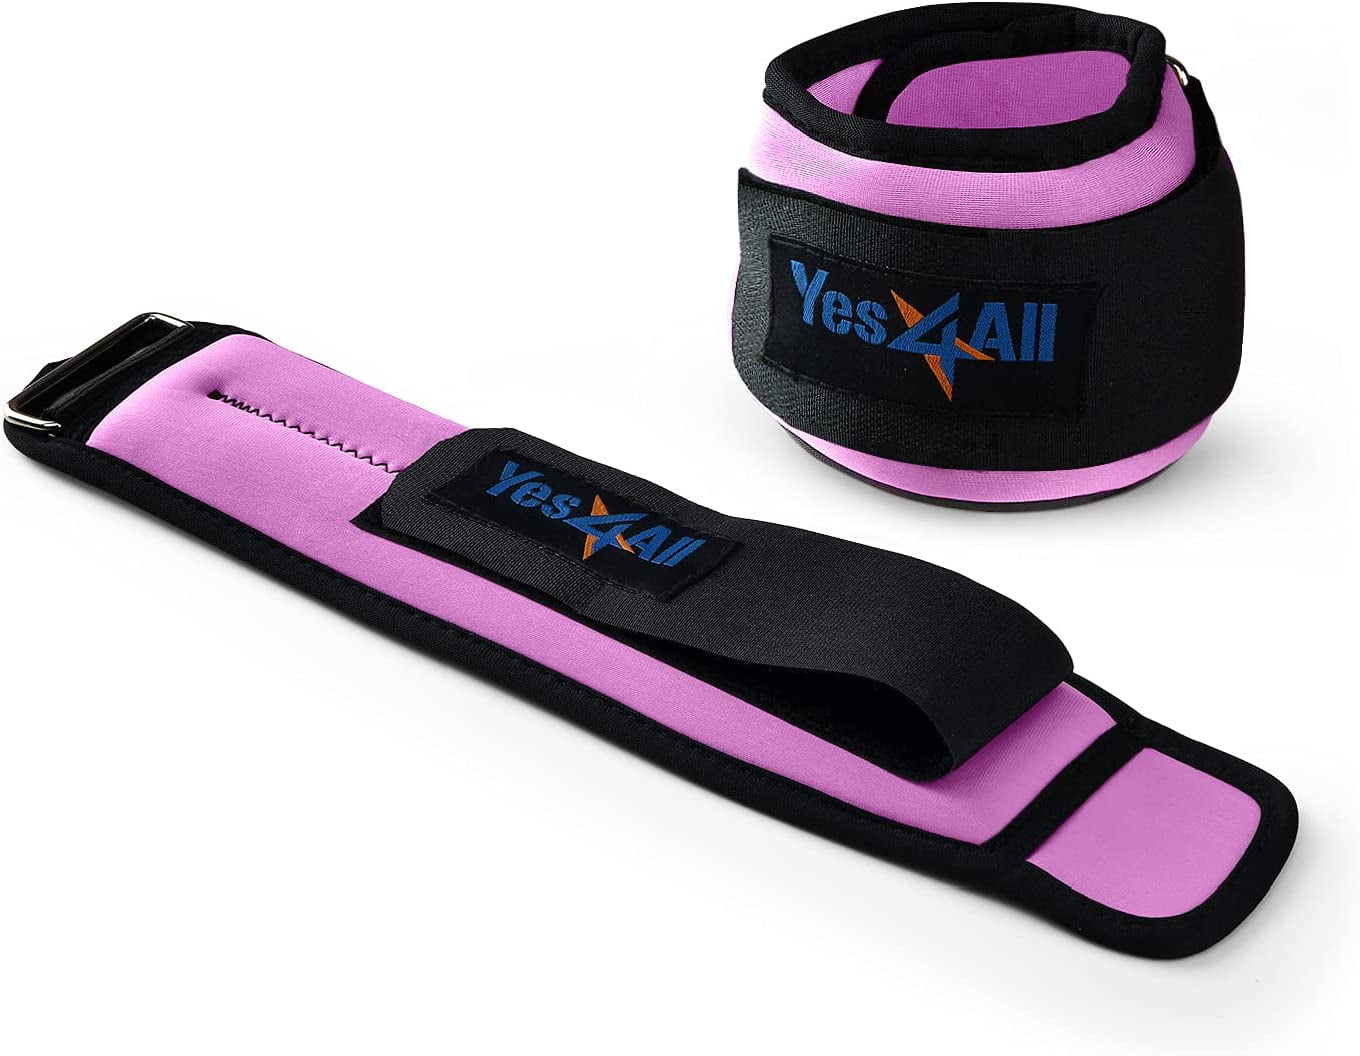 Weighted Child Wrist Bands Pair 200g Each 